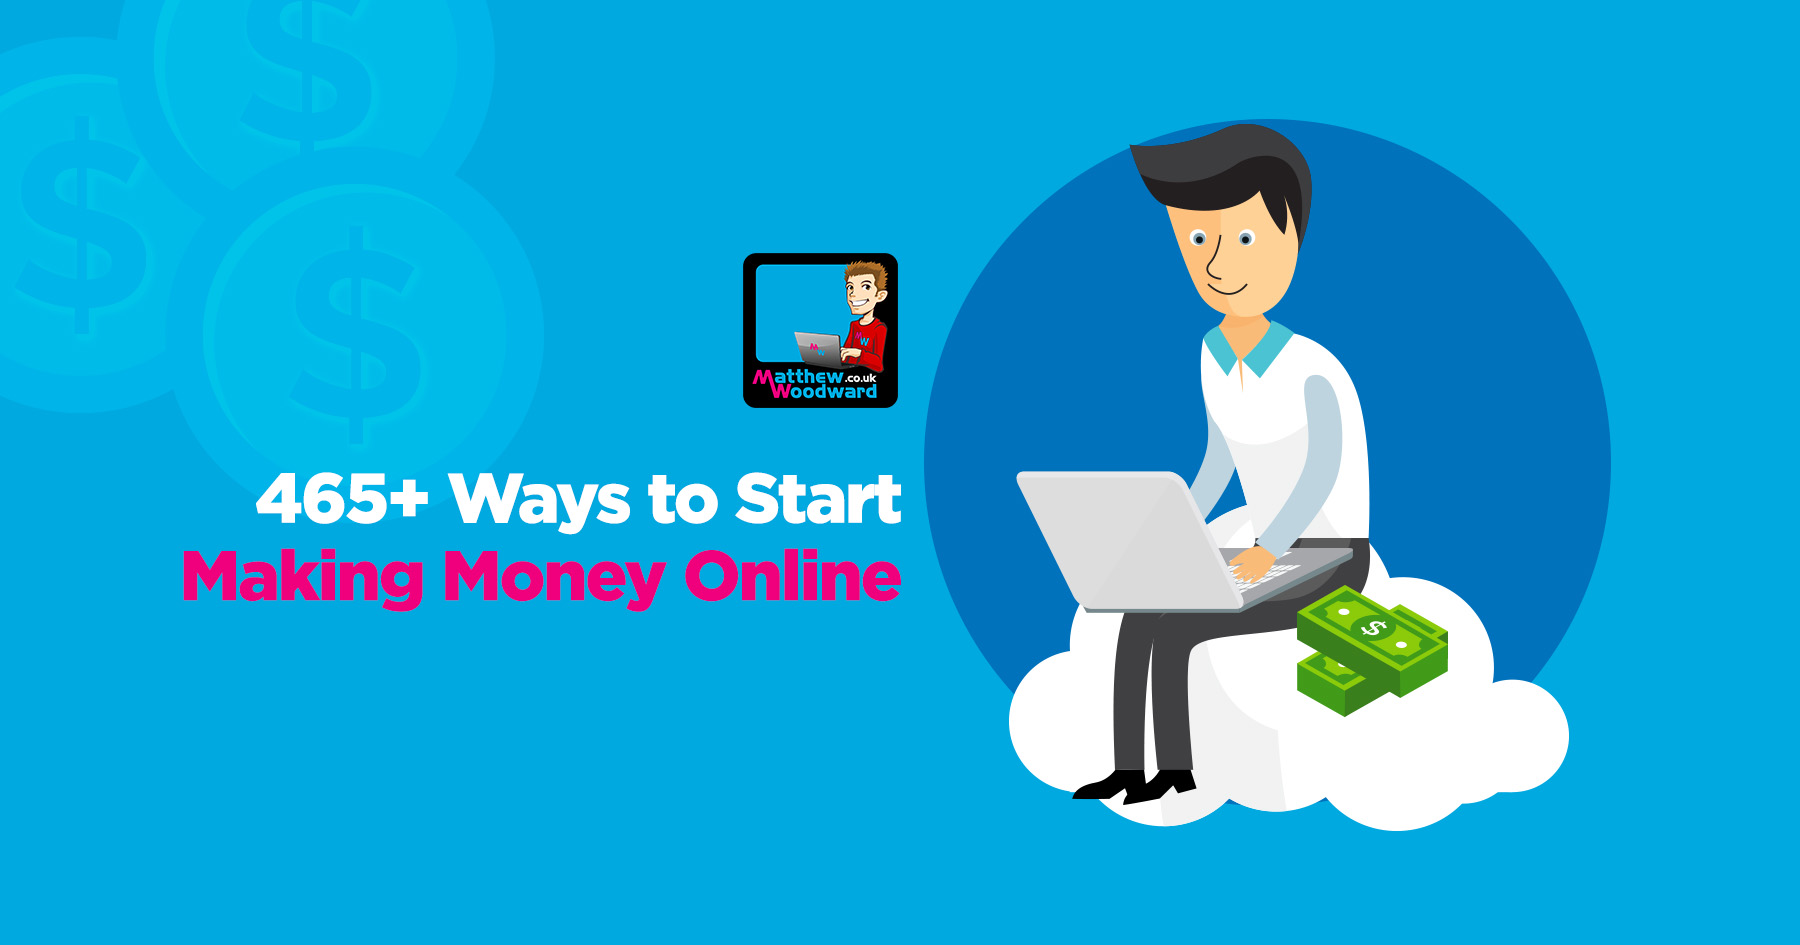 share your 8 ways to earn money online in pakistan consider